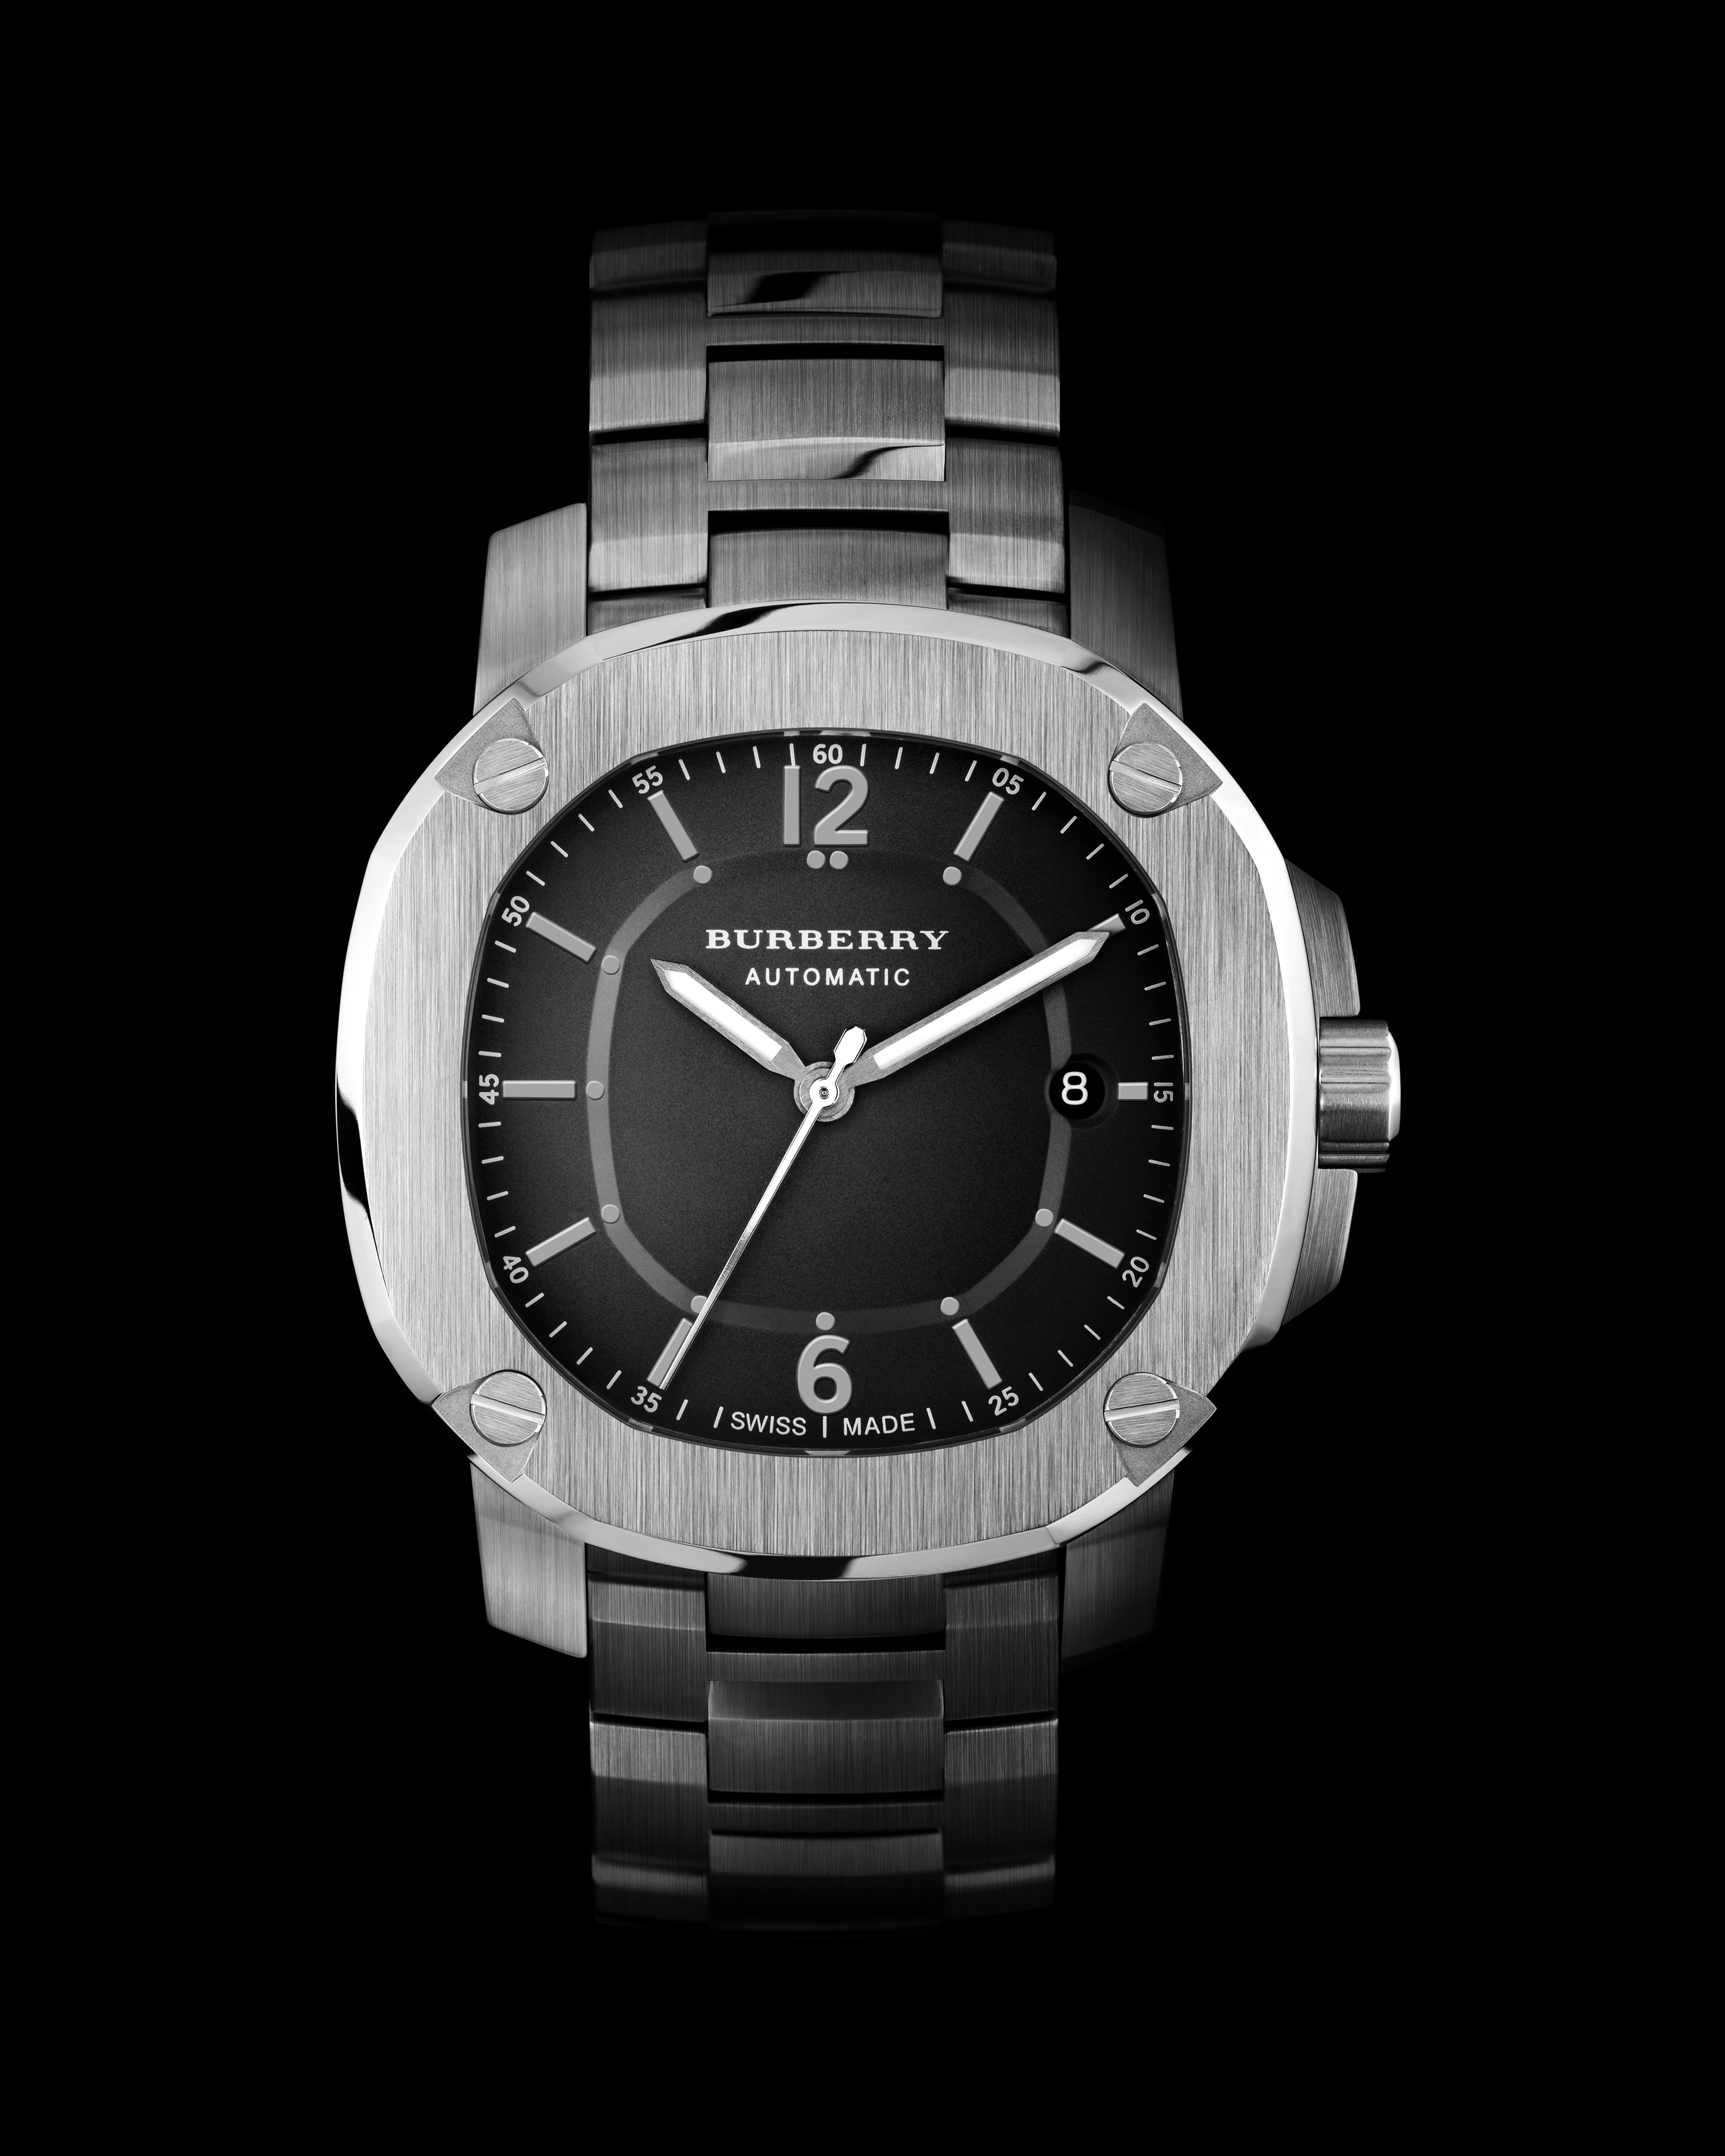 The Britains are Coming: Burberry's New Watch Collection | WatchTime -  USA's  Watch Magazine